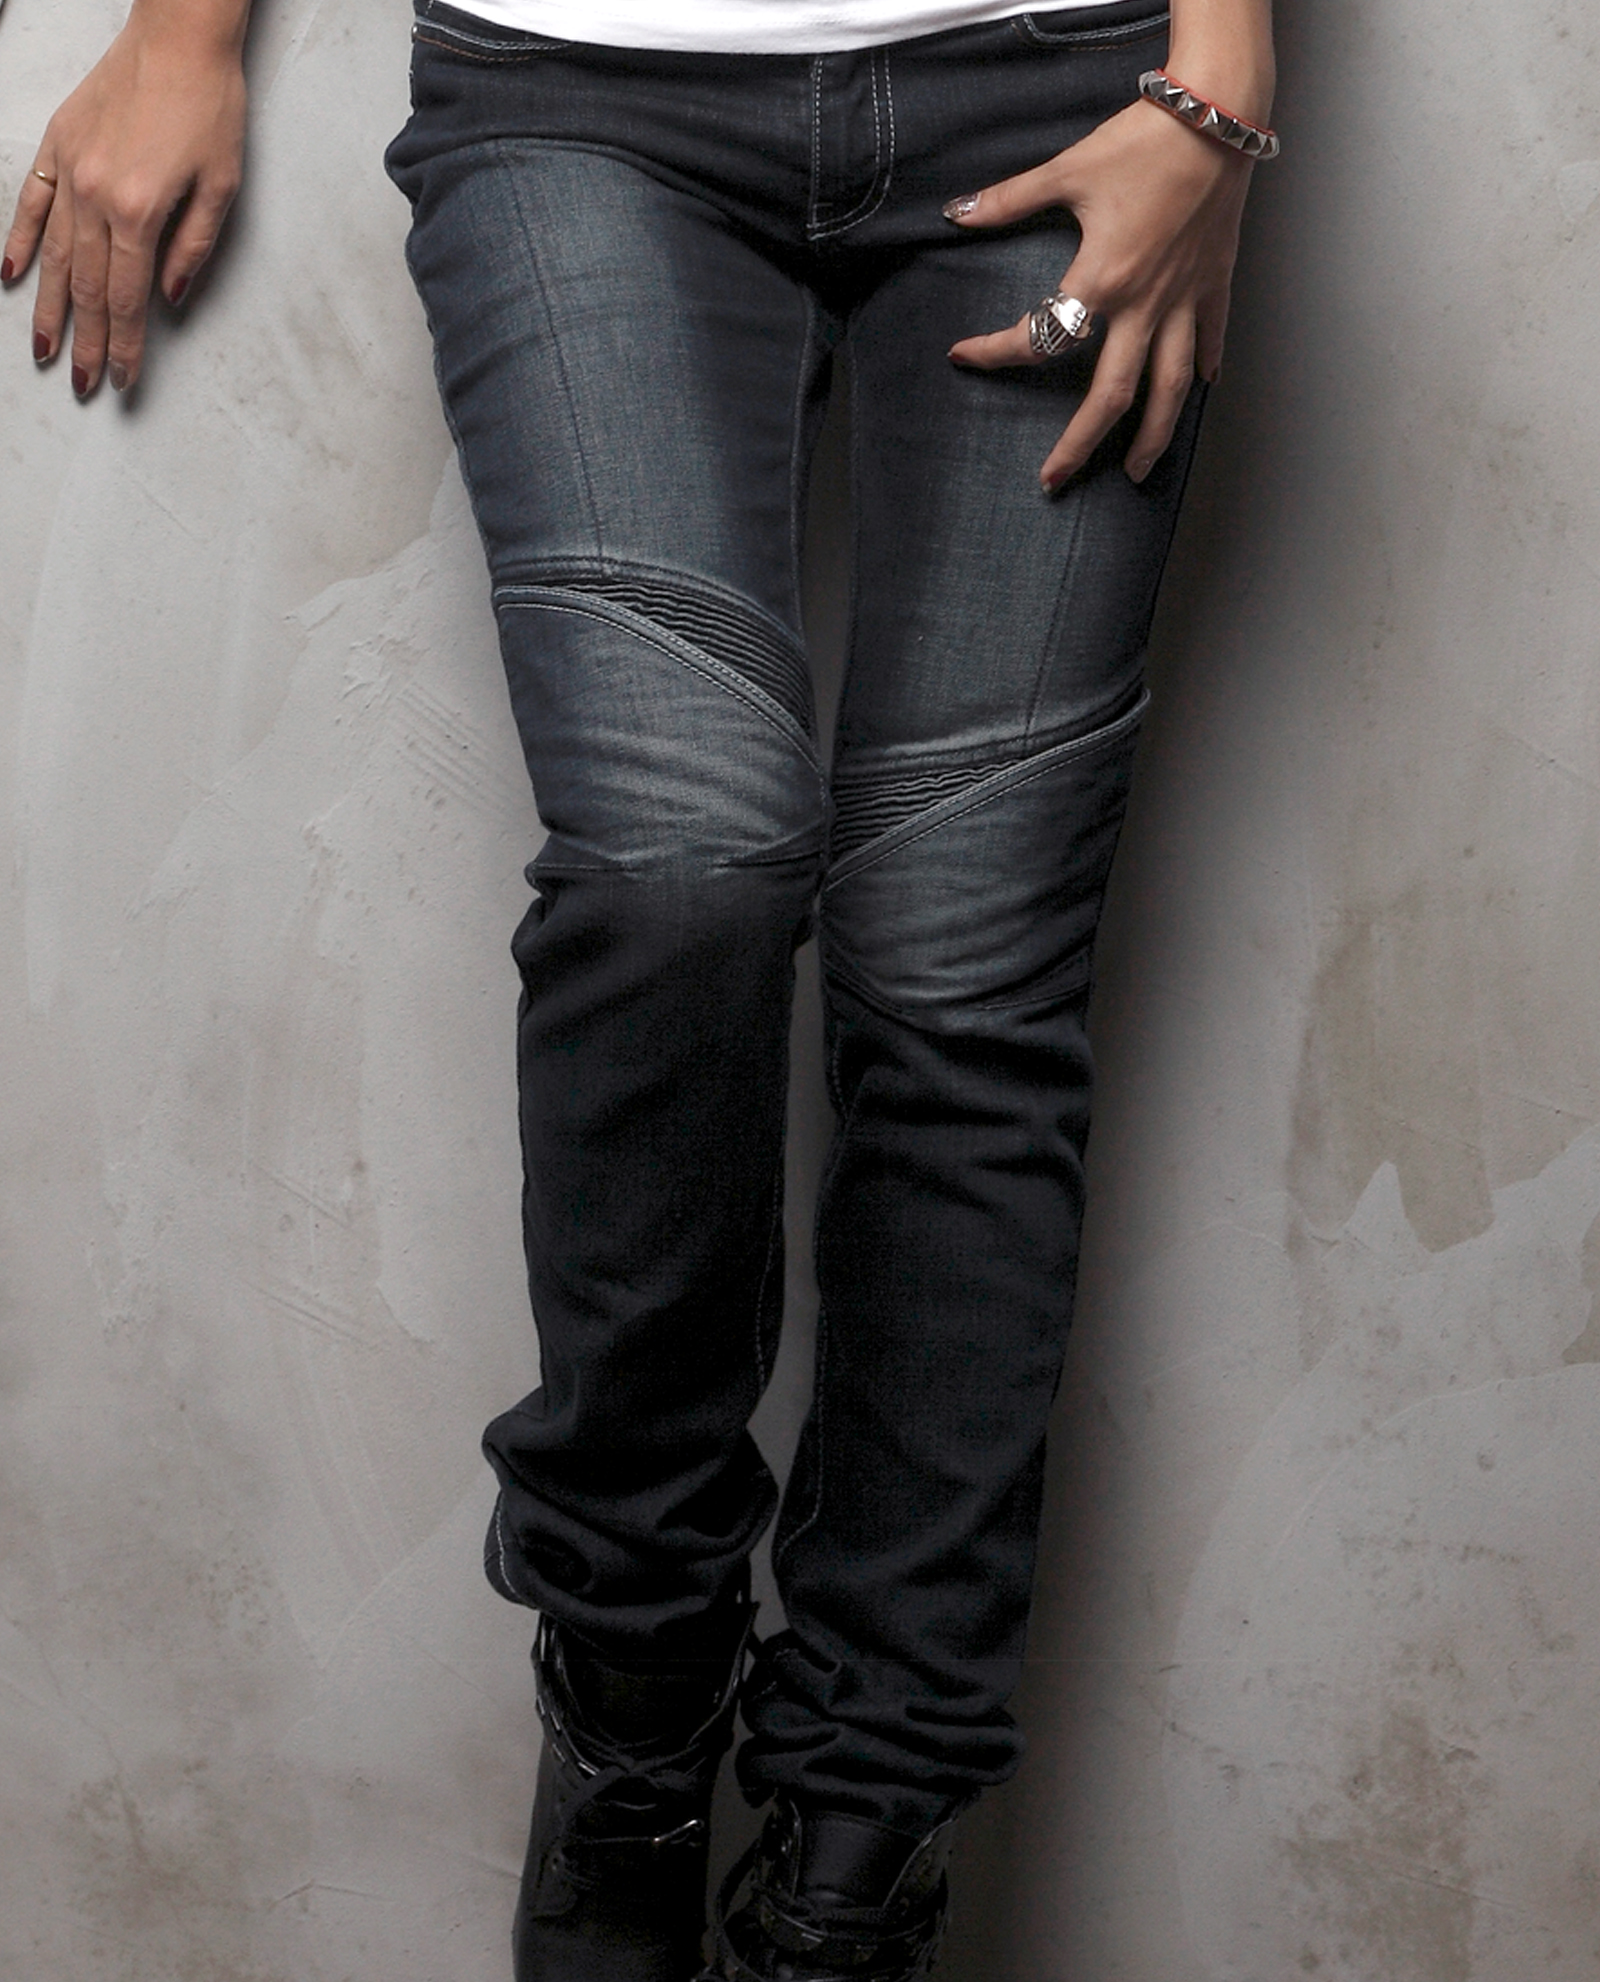 womens motorcycle jeans with armor